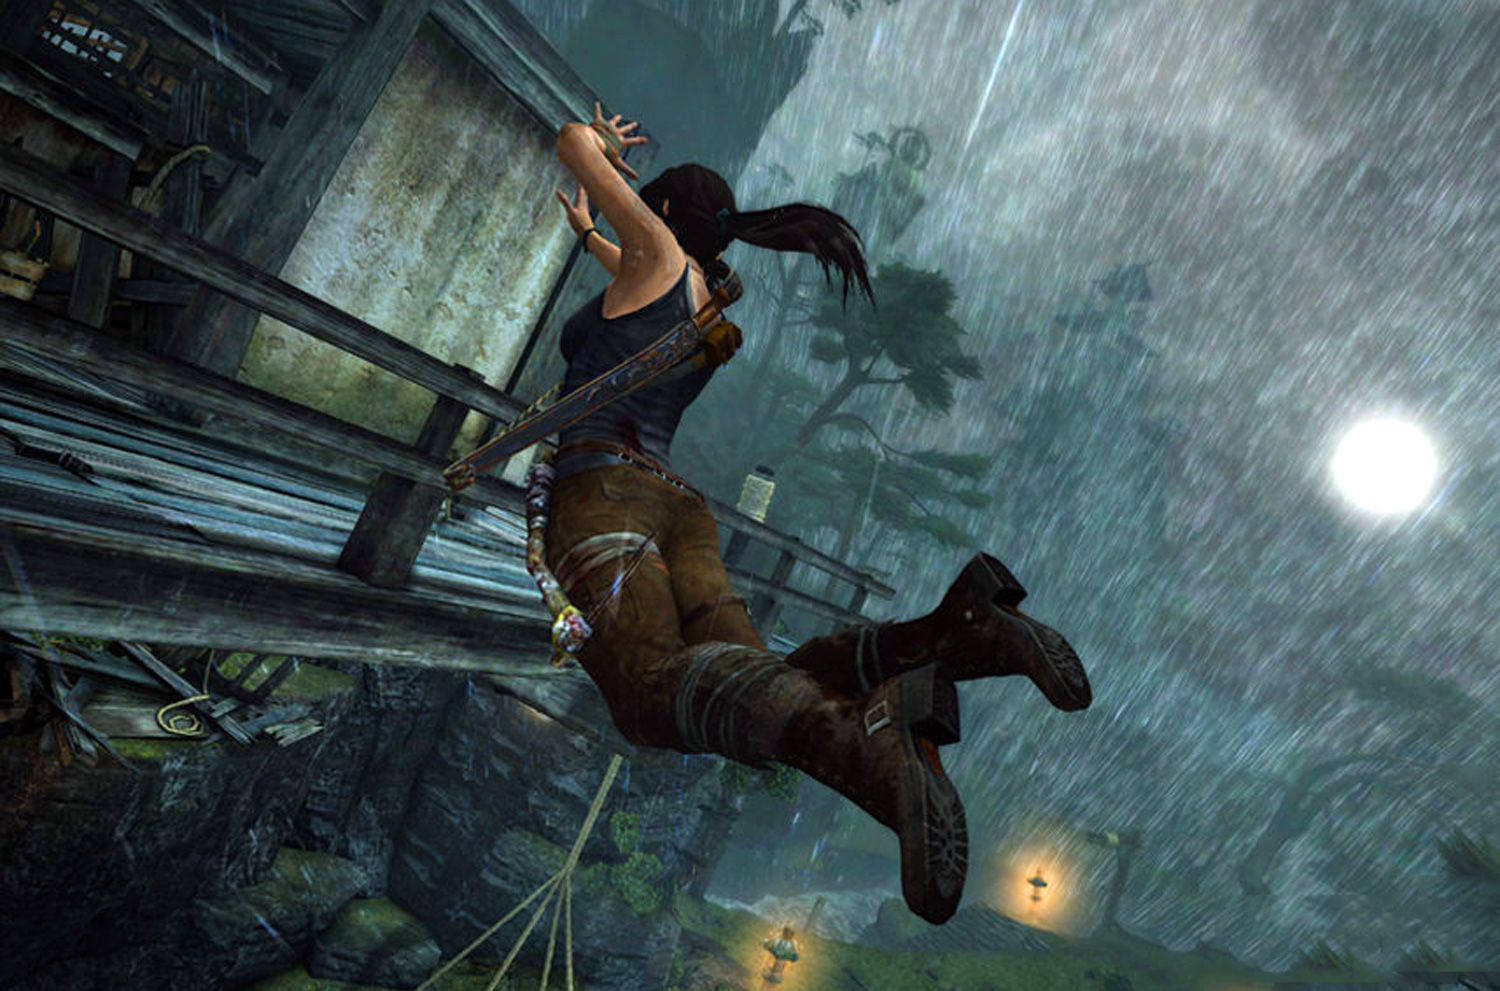 Tomb Raider Chronicles - TOMB RAIDER FRANCHISE EYES BUMPER YEAR IN